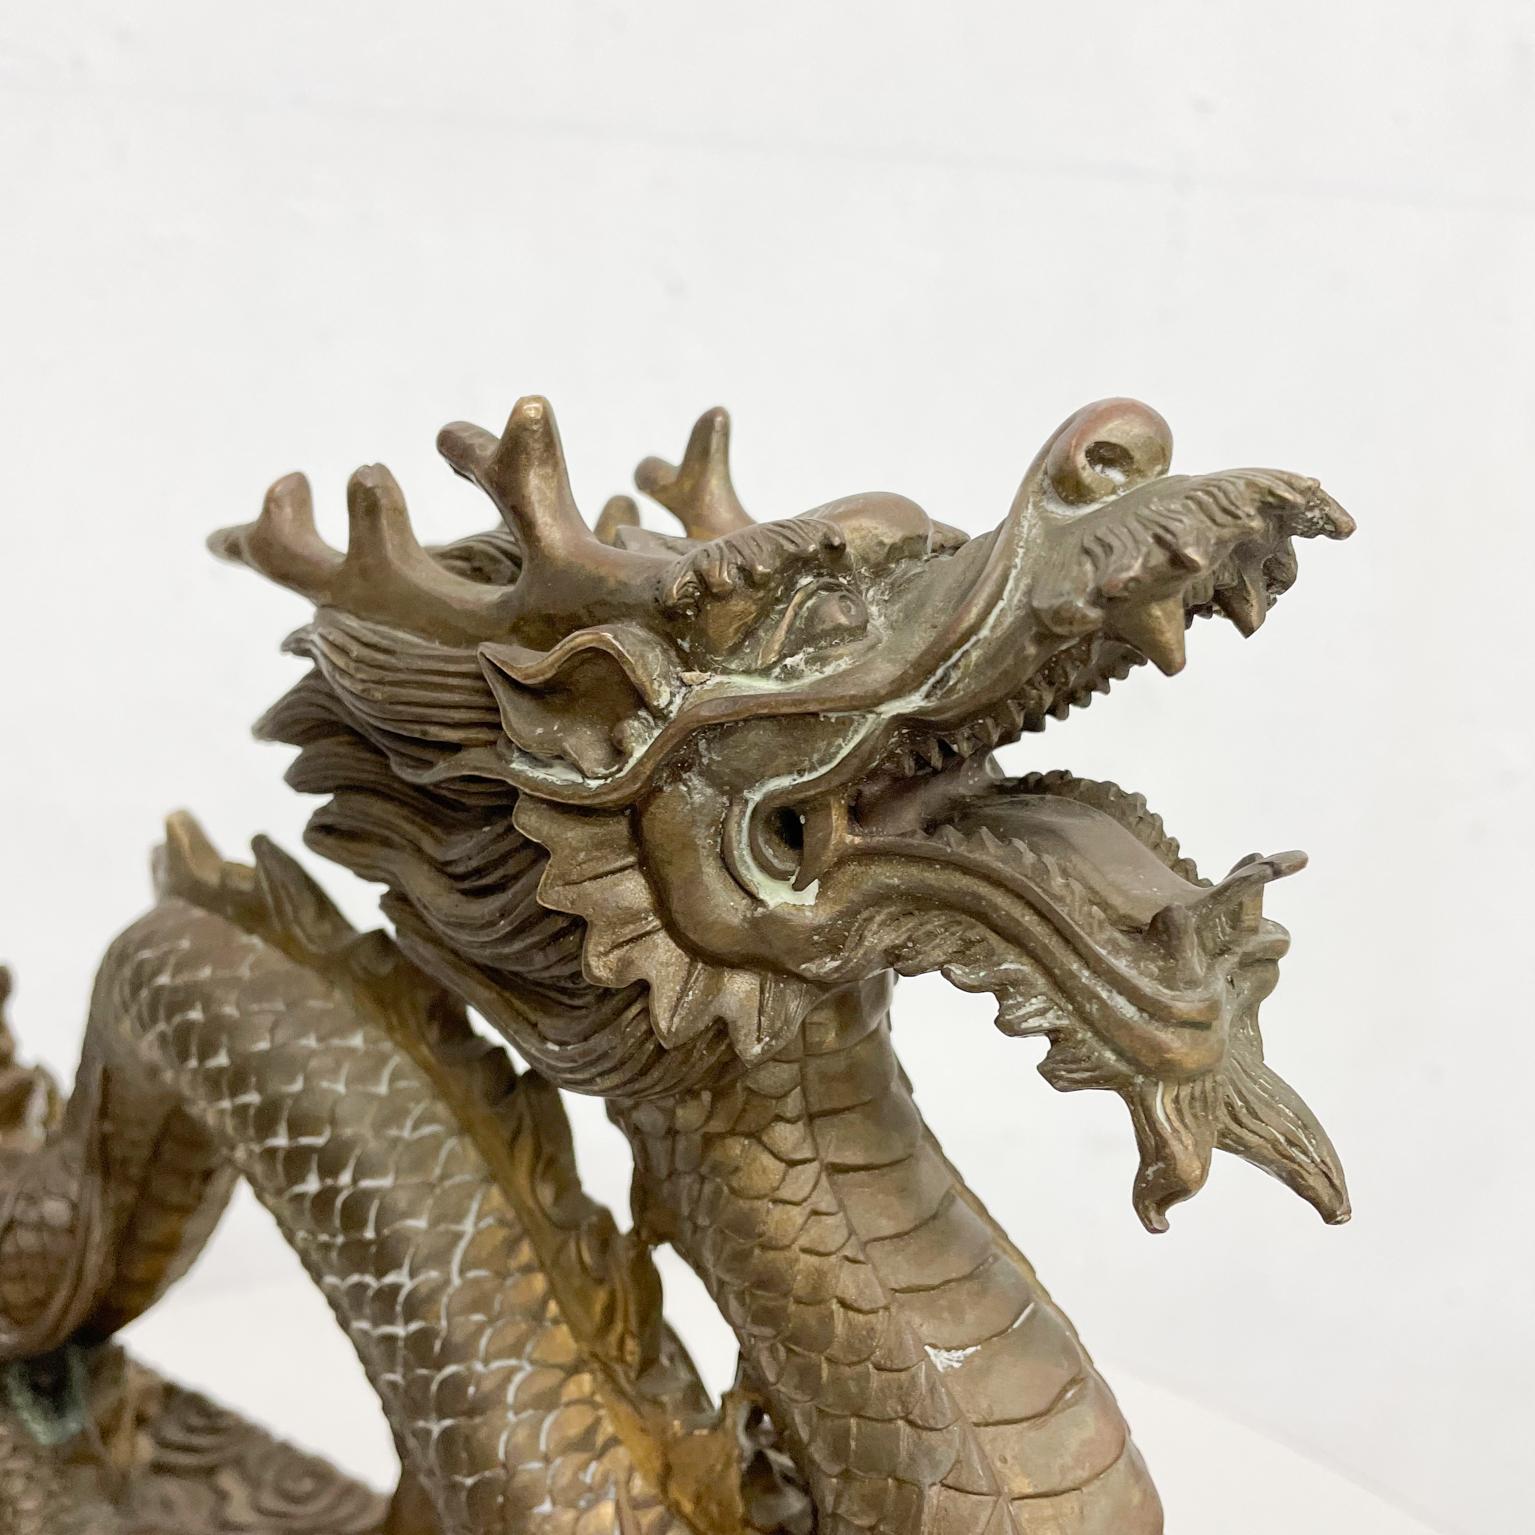 Chinese Export Powerful Chinese Feng Shui Dragon with Ball Bronze Sculpture Ornate Relief